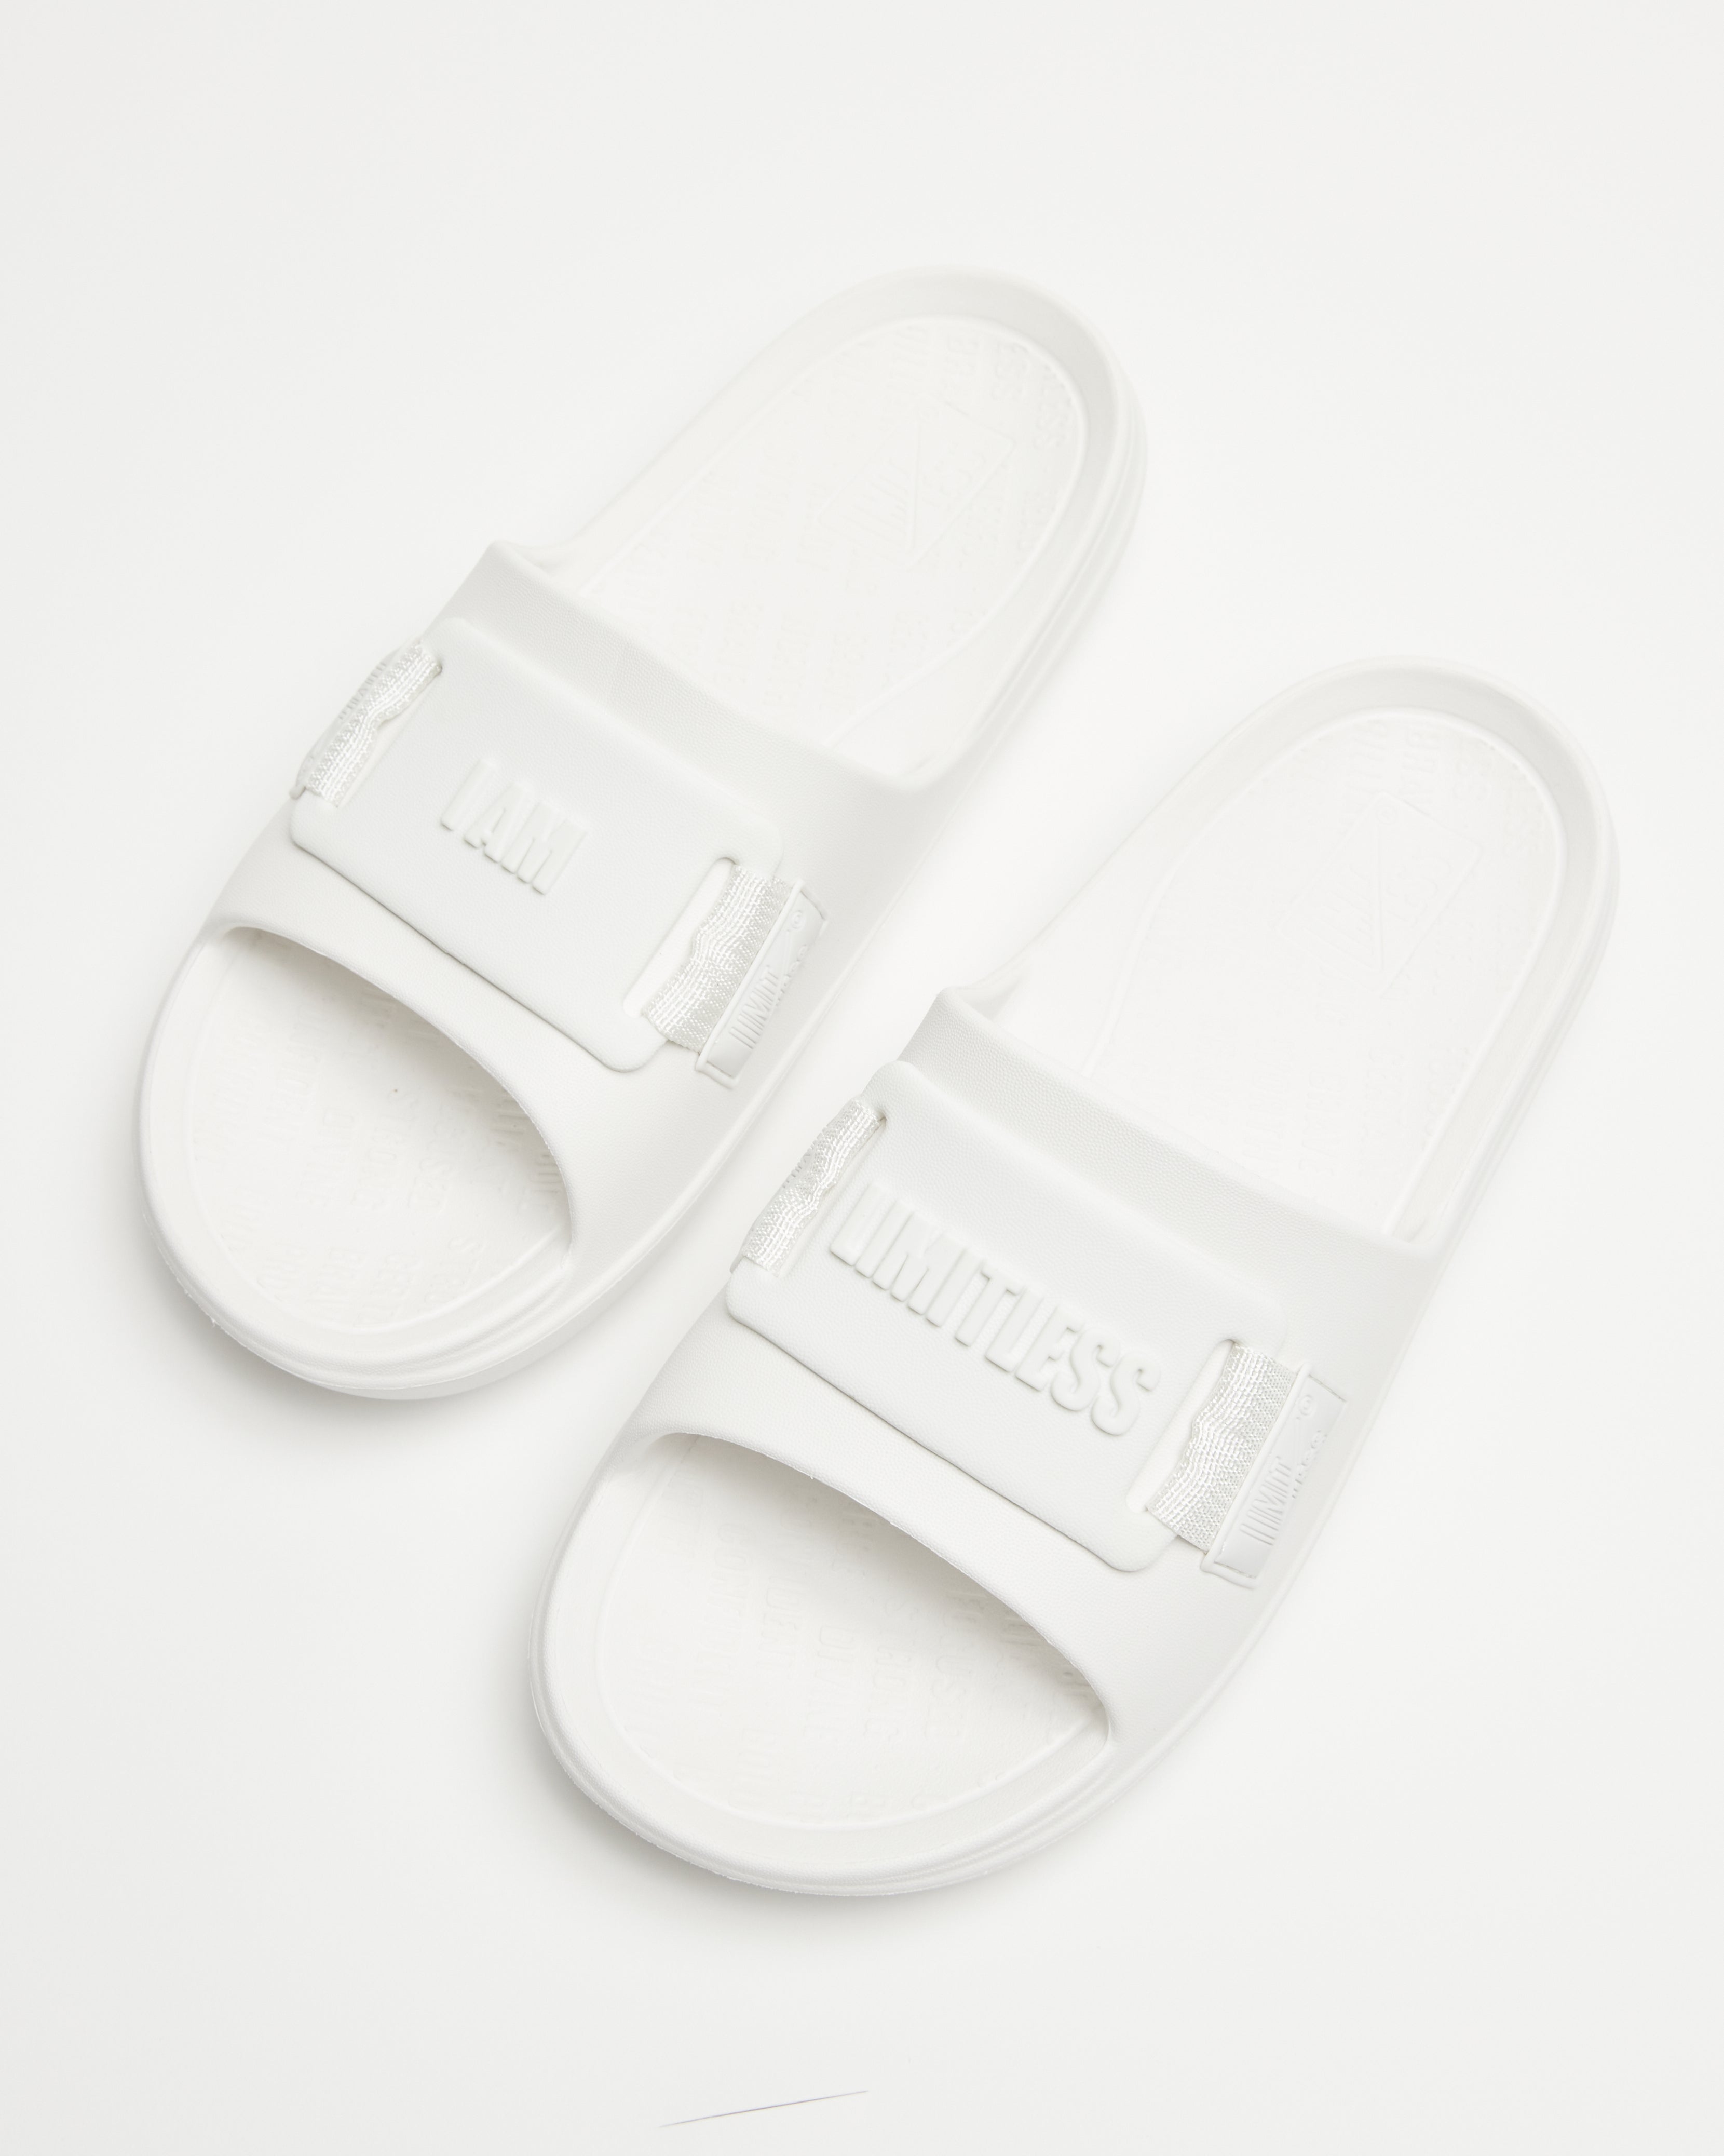 LIMITLESS SLIDES™ WITH ESSENTIAL TIBAH™ QUAD - AMERICAN HERITAGE HIGH SCHOOL EDITION